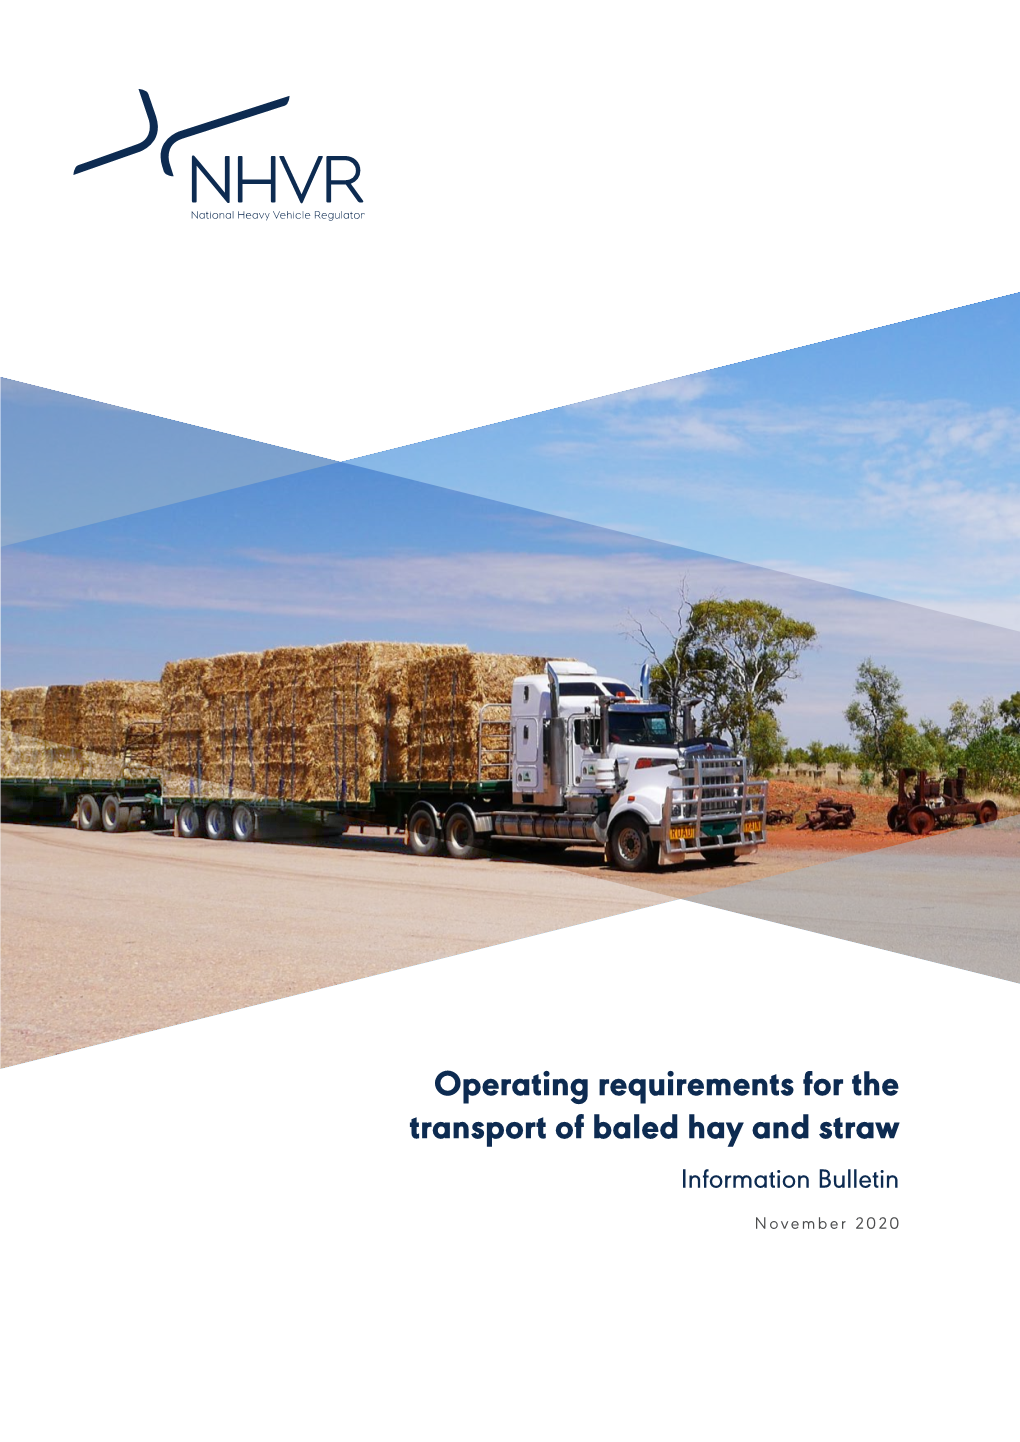 Operating Requirements for the Transport of Baled Hay and Straw Information Bulletin